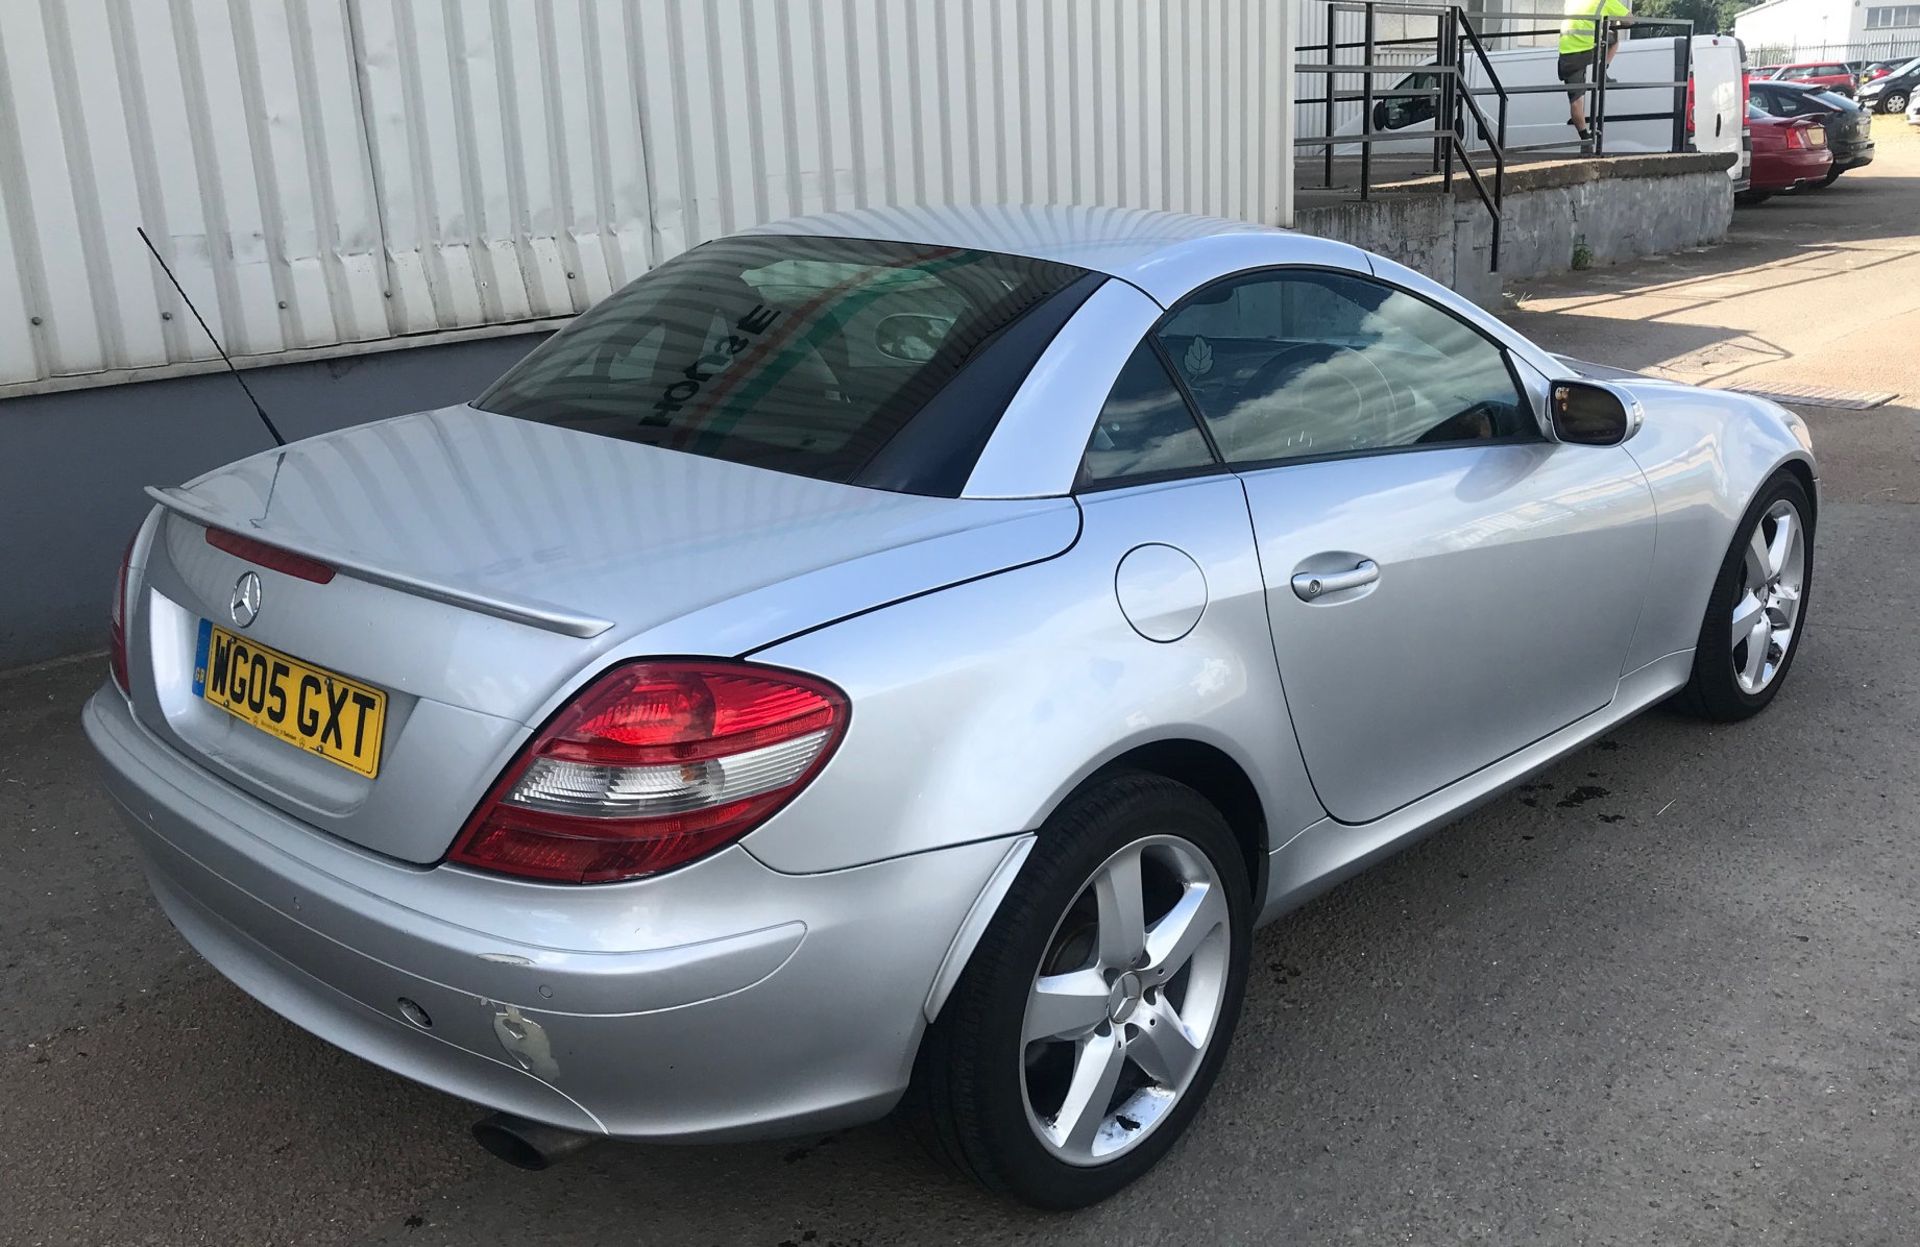 2005 Mercedes SLK 350 2 Dr Convertible - CL505 - NO VAT ON THE HAMMER - Location: Corby, N - Image 7 of 11